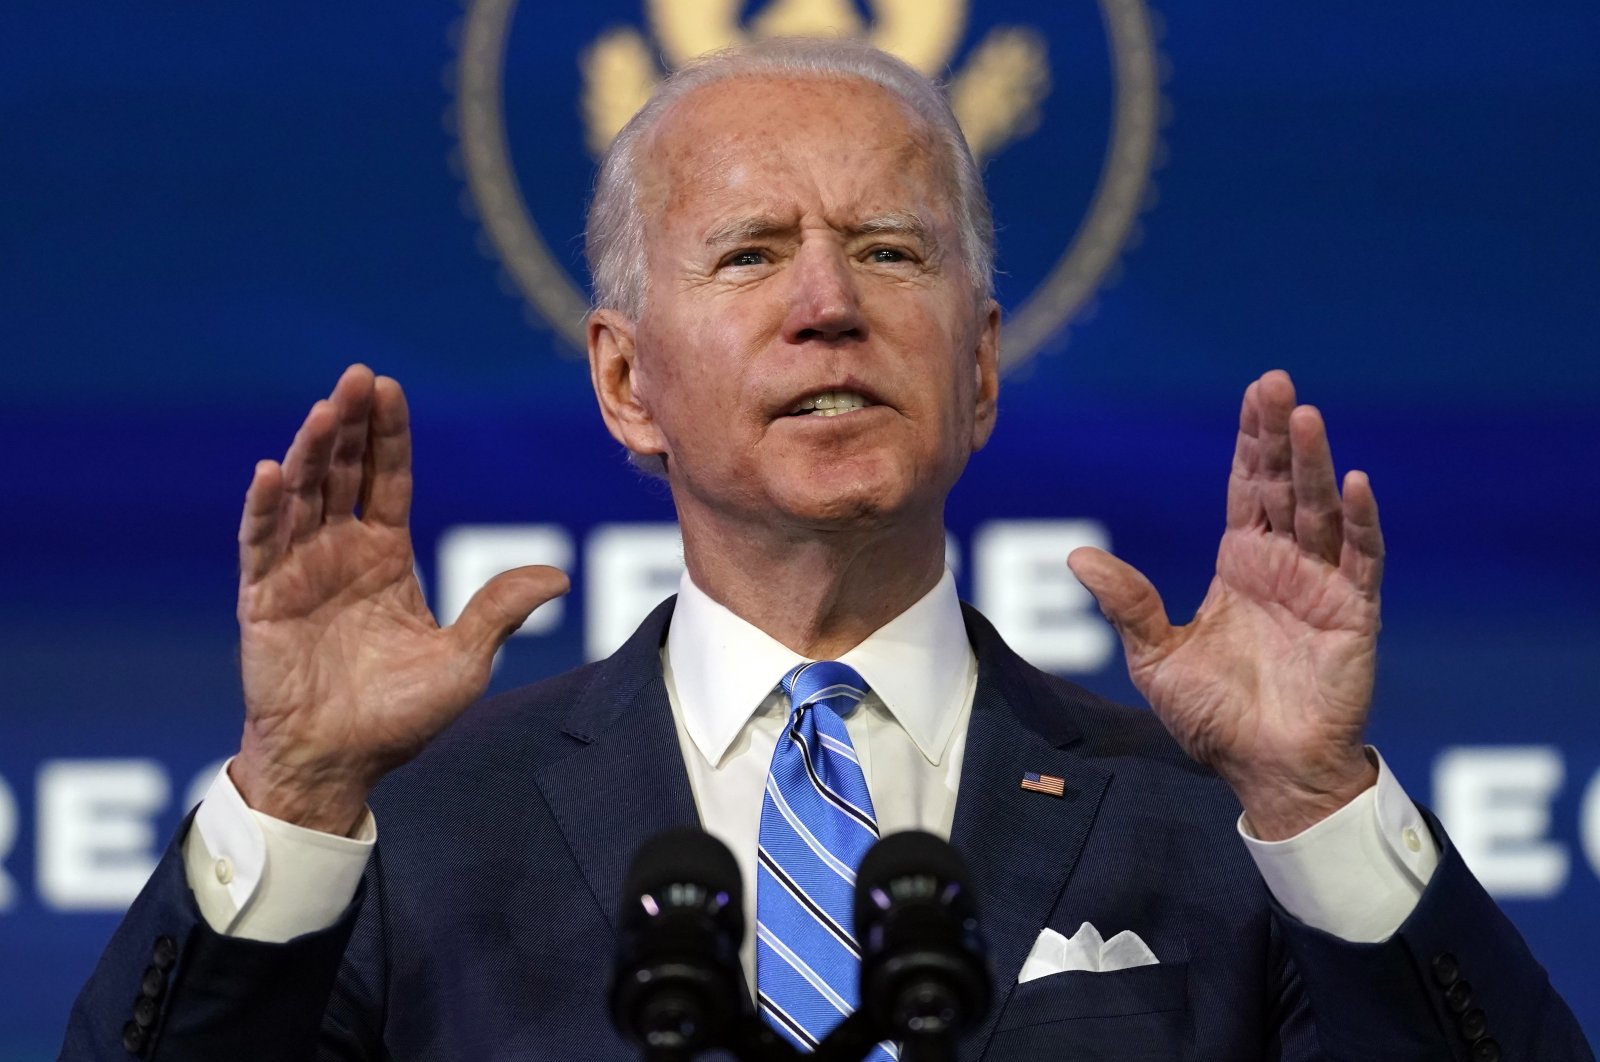 U.S. President-elect Joe Biden speaks about the COVID-19 pandemic during an event at The Queen Theater in Wilmington, Delaware on Jan. 14, 2021. (AP Photo)